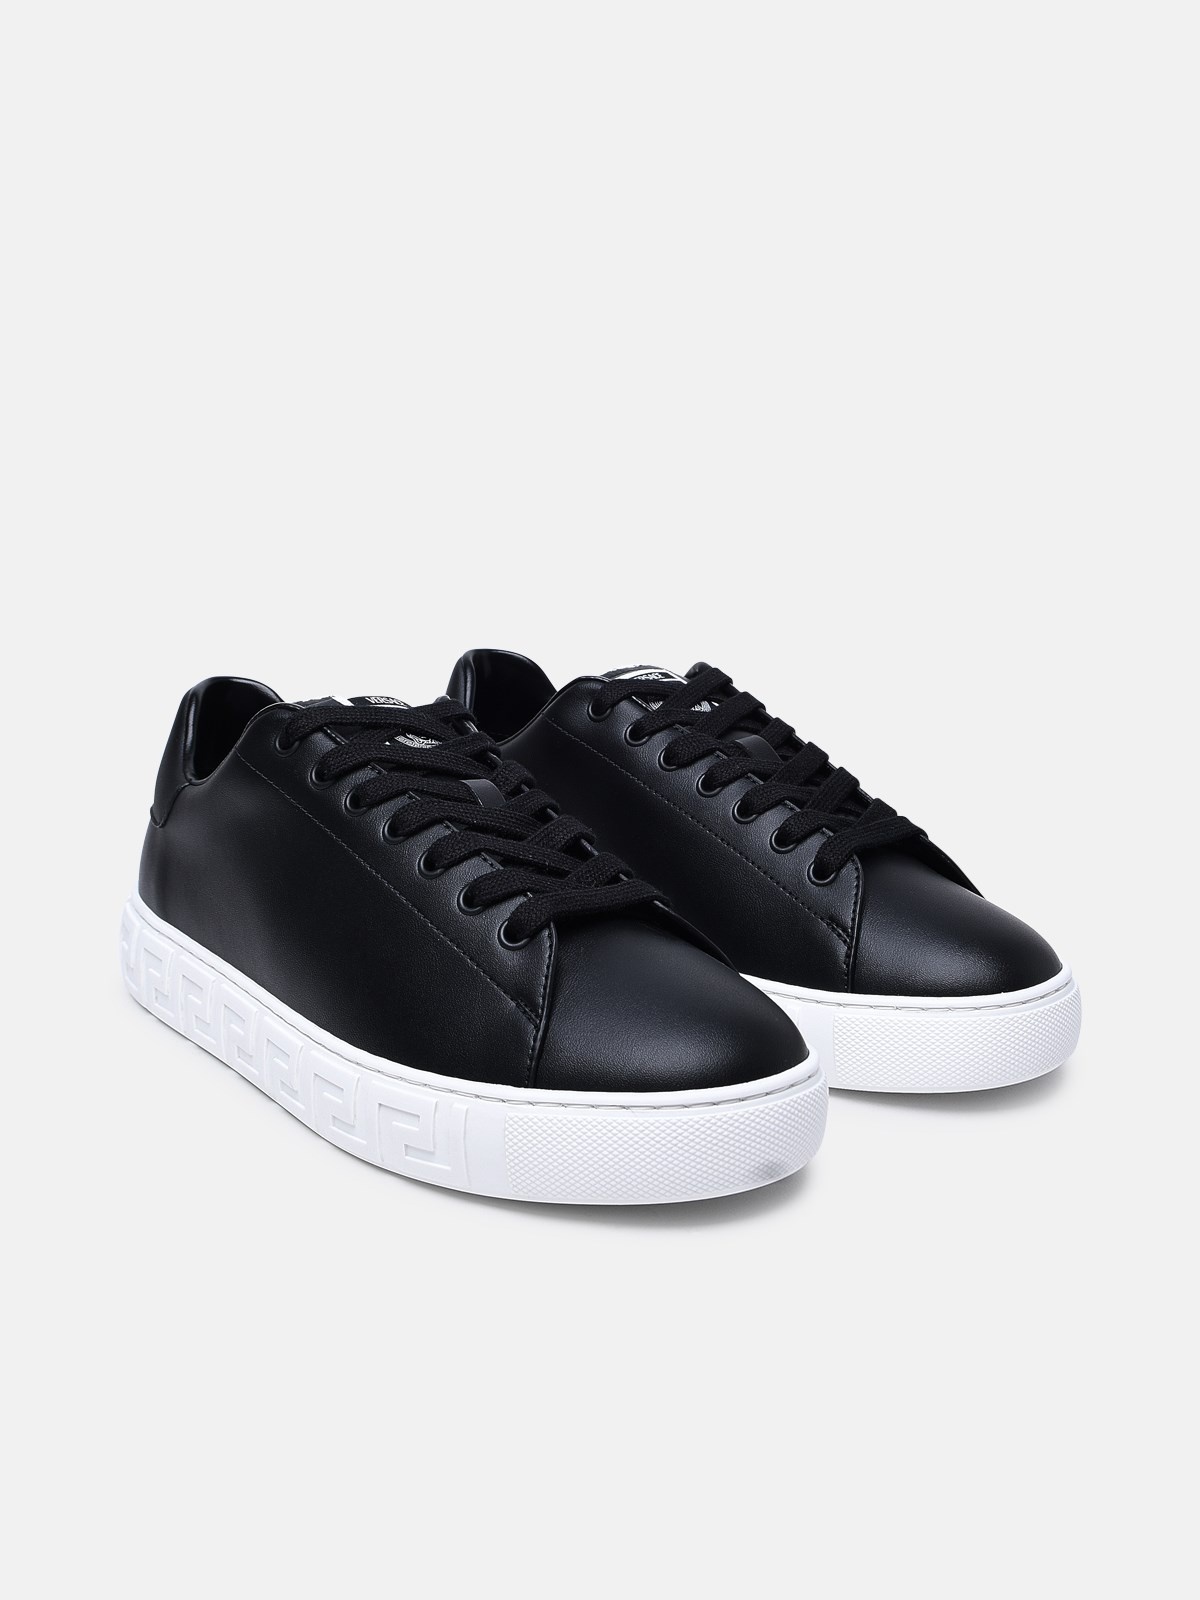 BLACK LEATHER SNEAKERS - 2